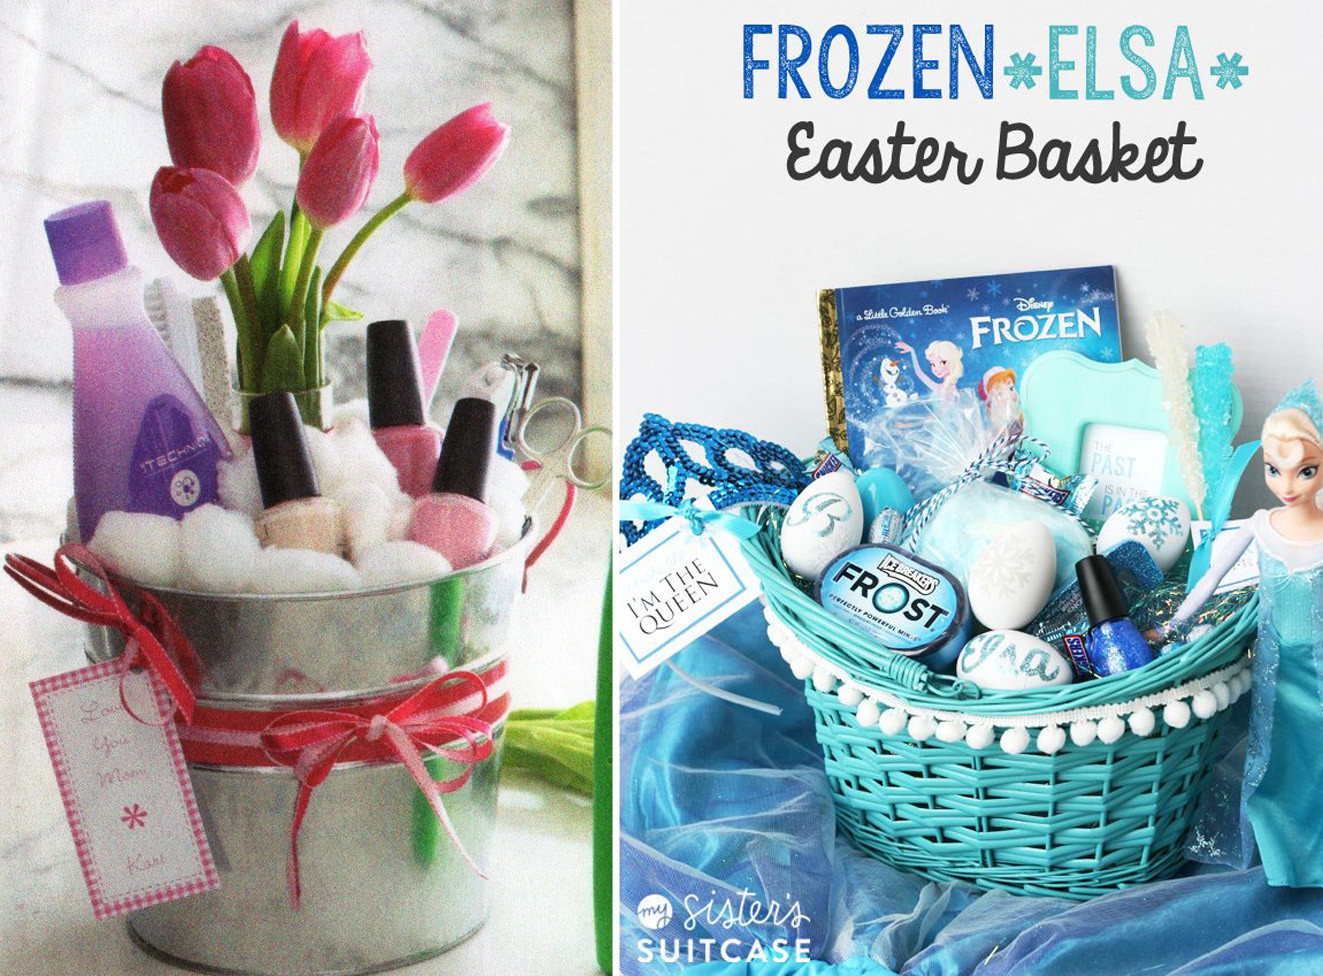 Cute Easter Basket Ideas
 5 Super Cute Easter Baskets You Can Make For Your Friends